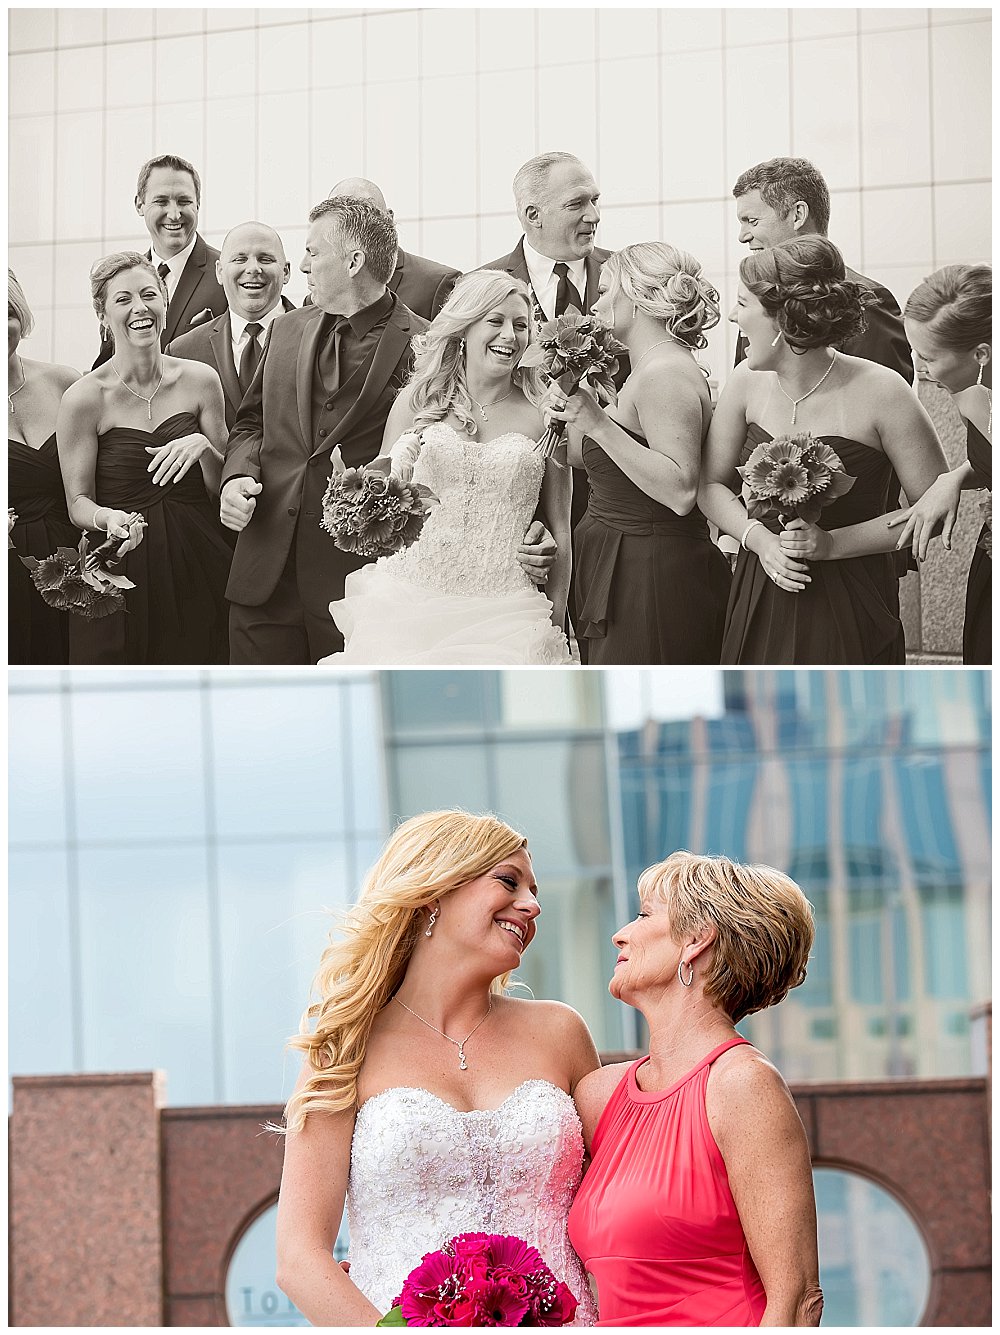 ©Silver Orchid Photography_wedding photography_FooteTopofTower_silverorchidphotography.com_0016.jpg